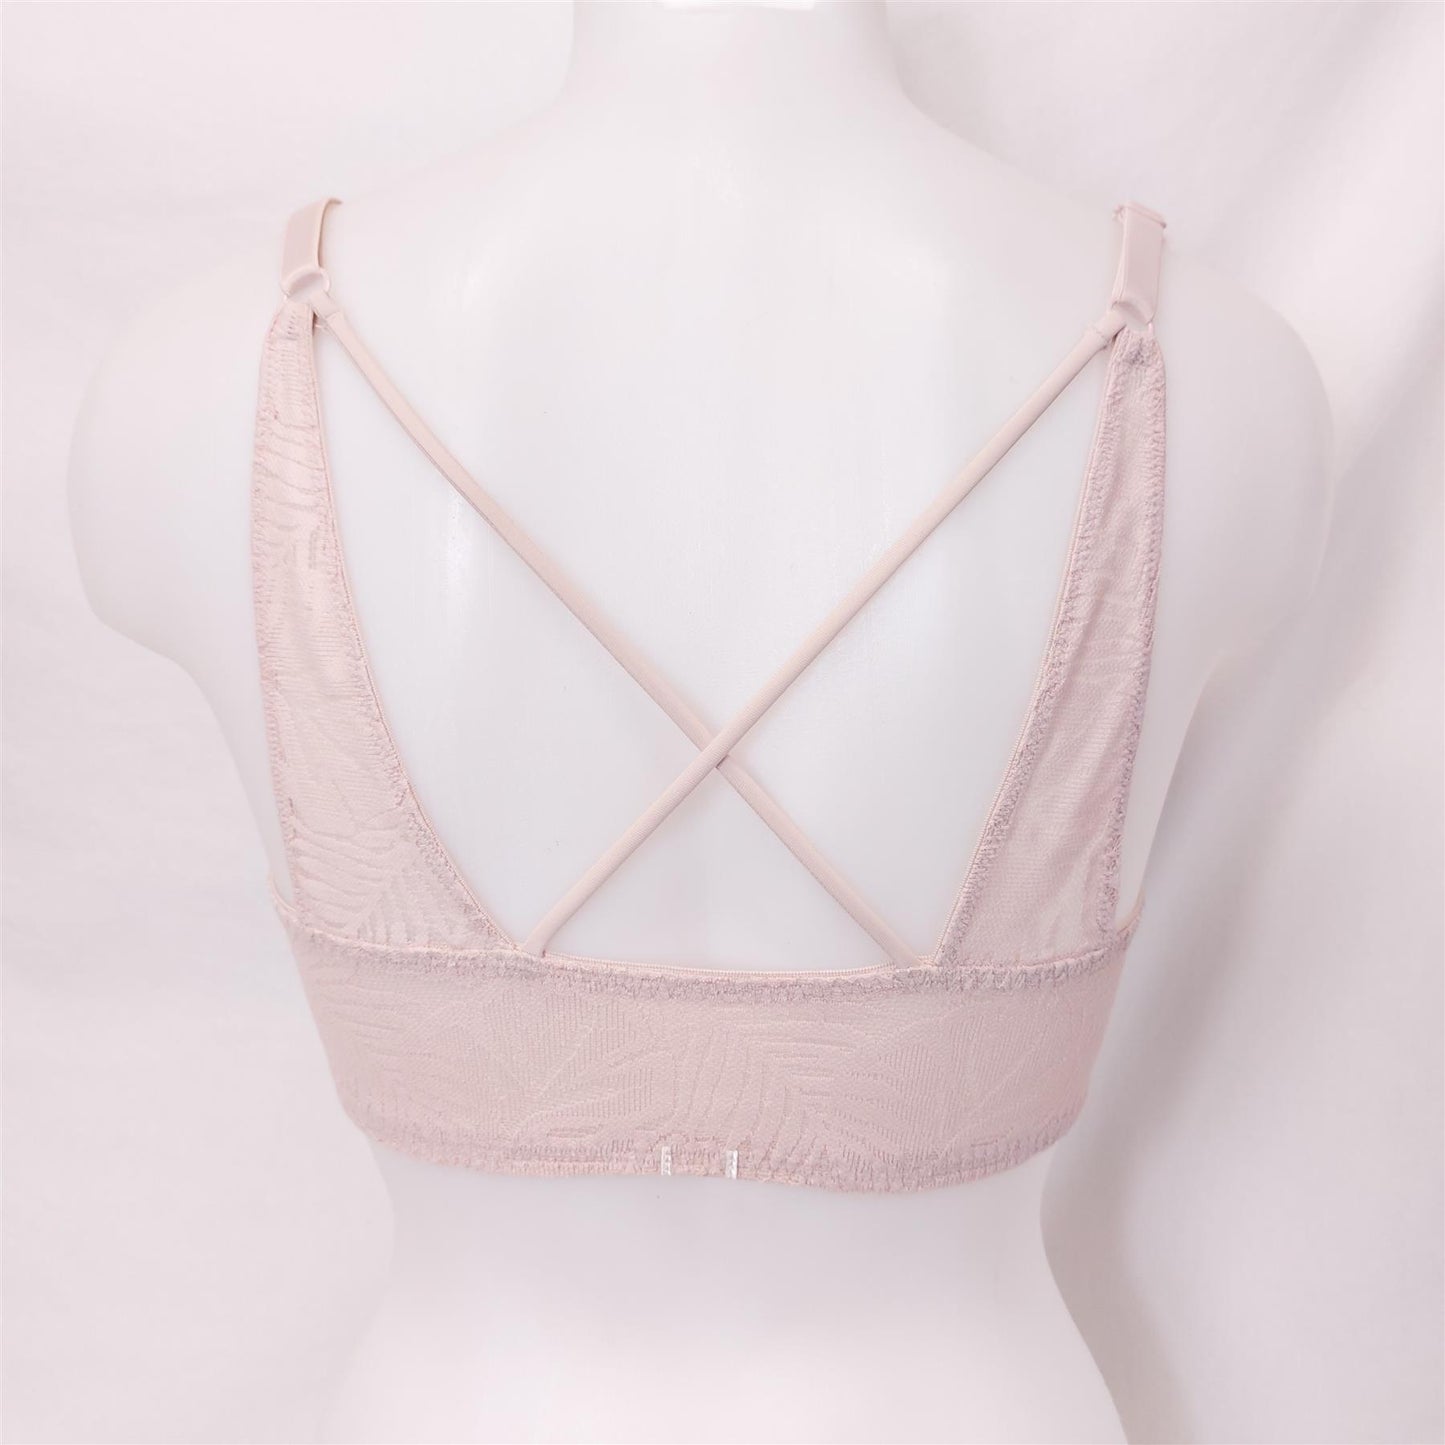 Ex Victoria's Secret Bra Padded Push-Up Front Clasp Lace Overlay